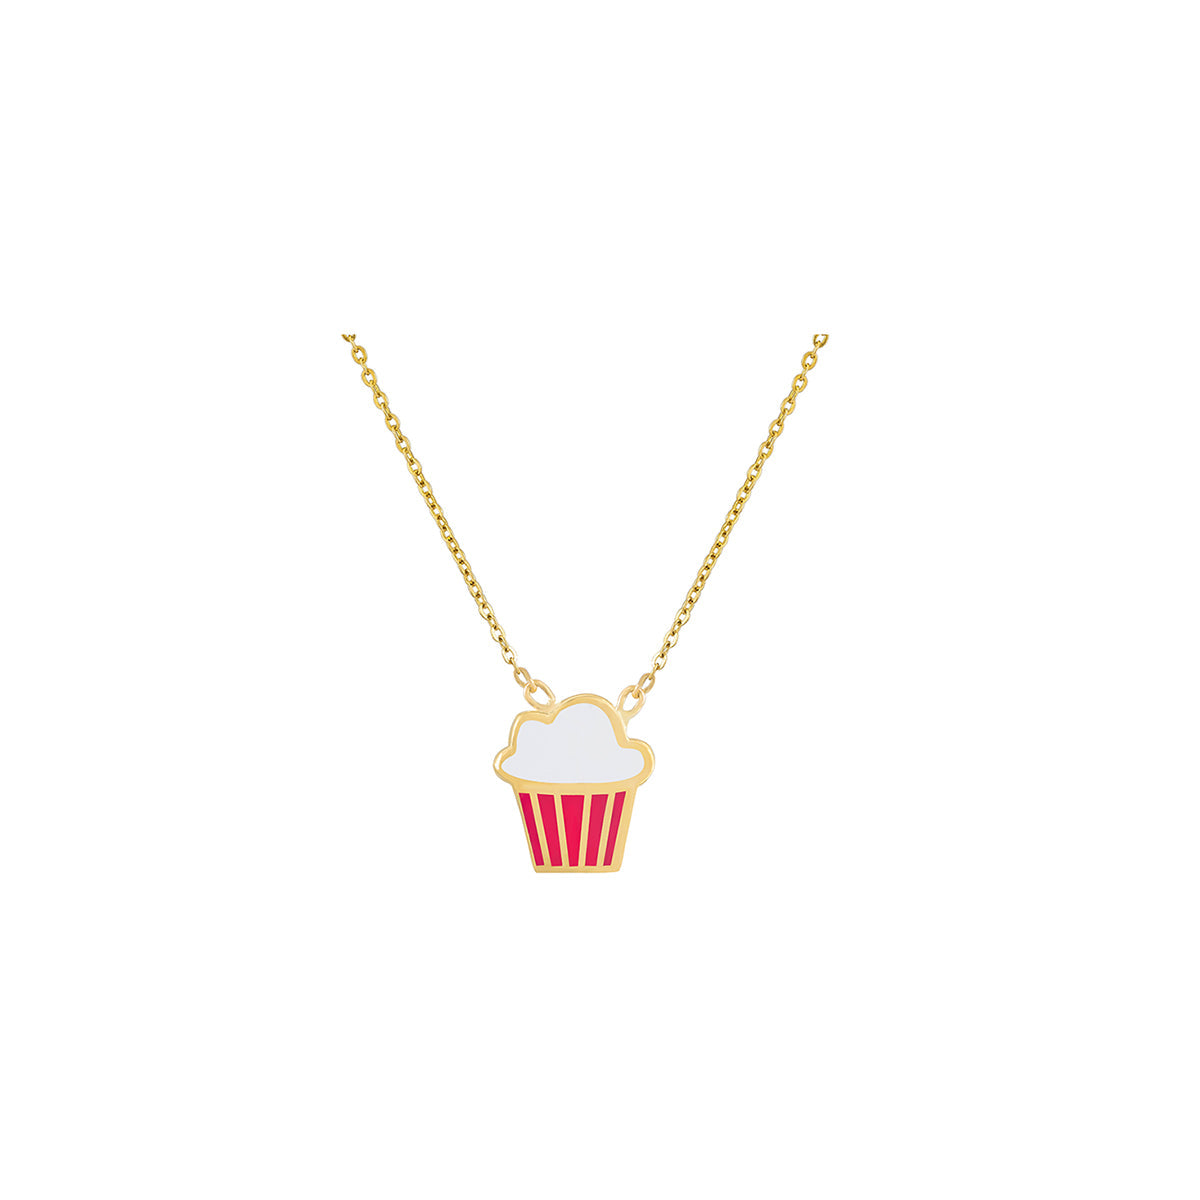 Cupcake Charm Necklace in 18K Yellow Gold